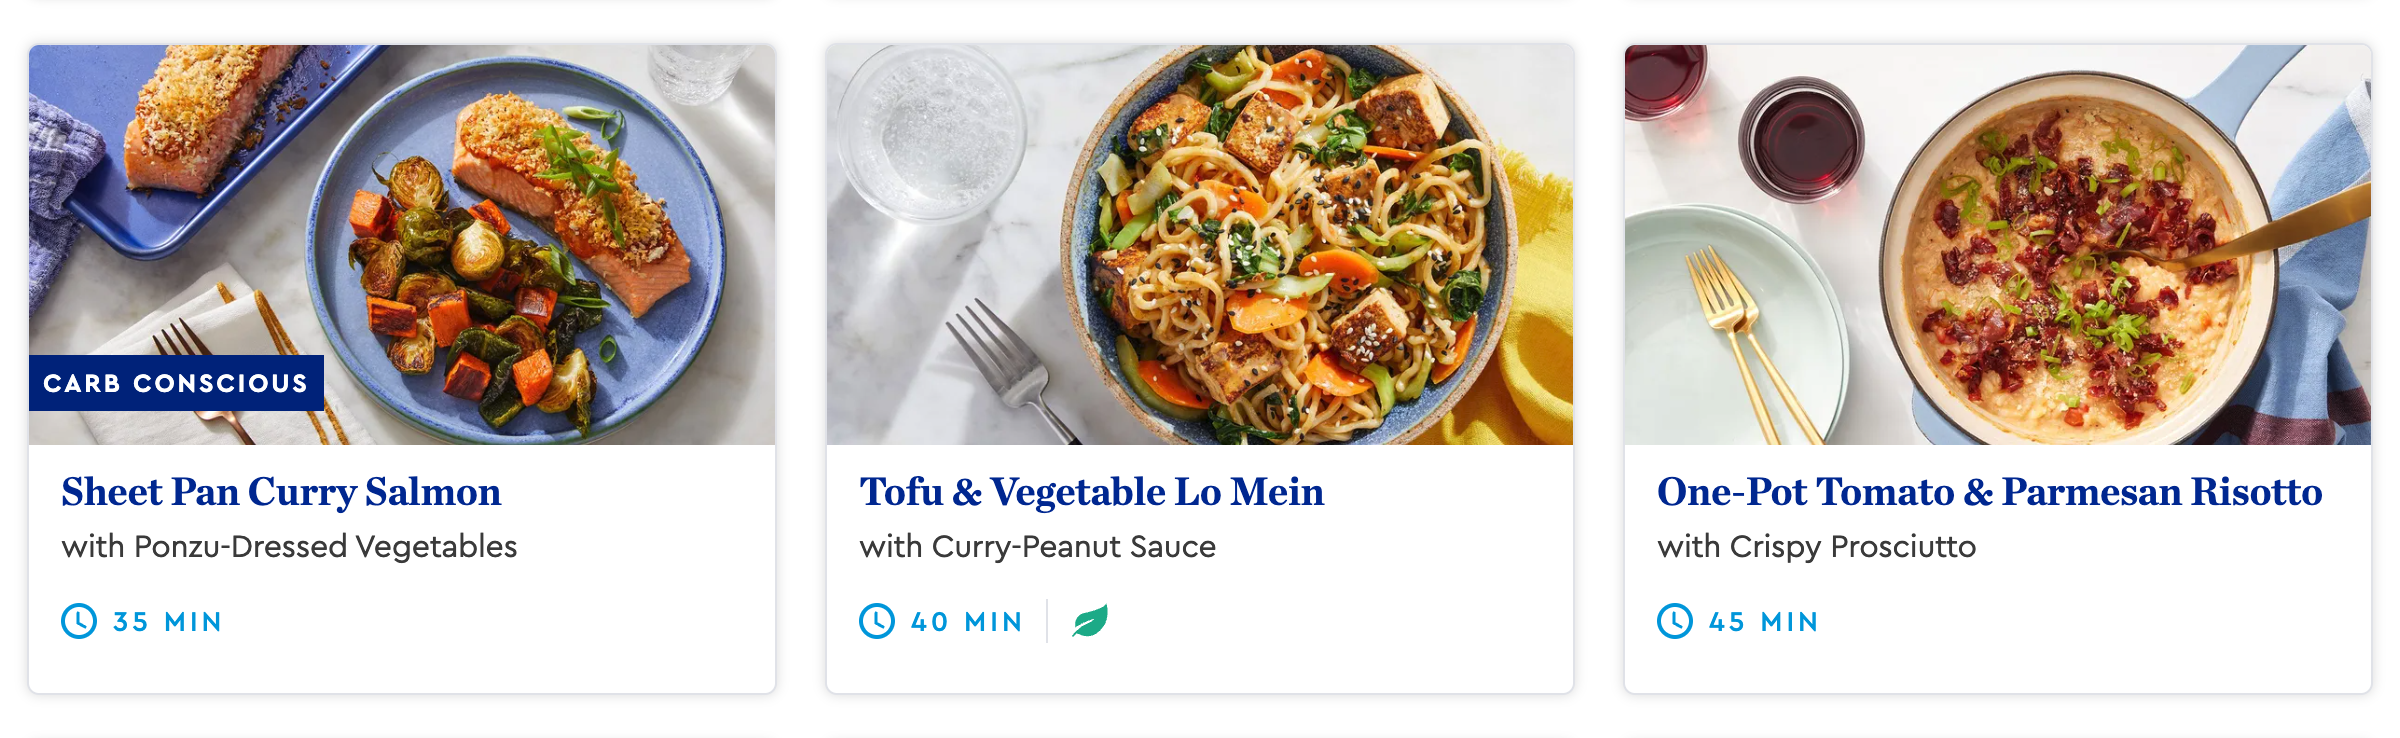 Blue Apron weekly meal options